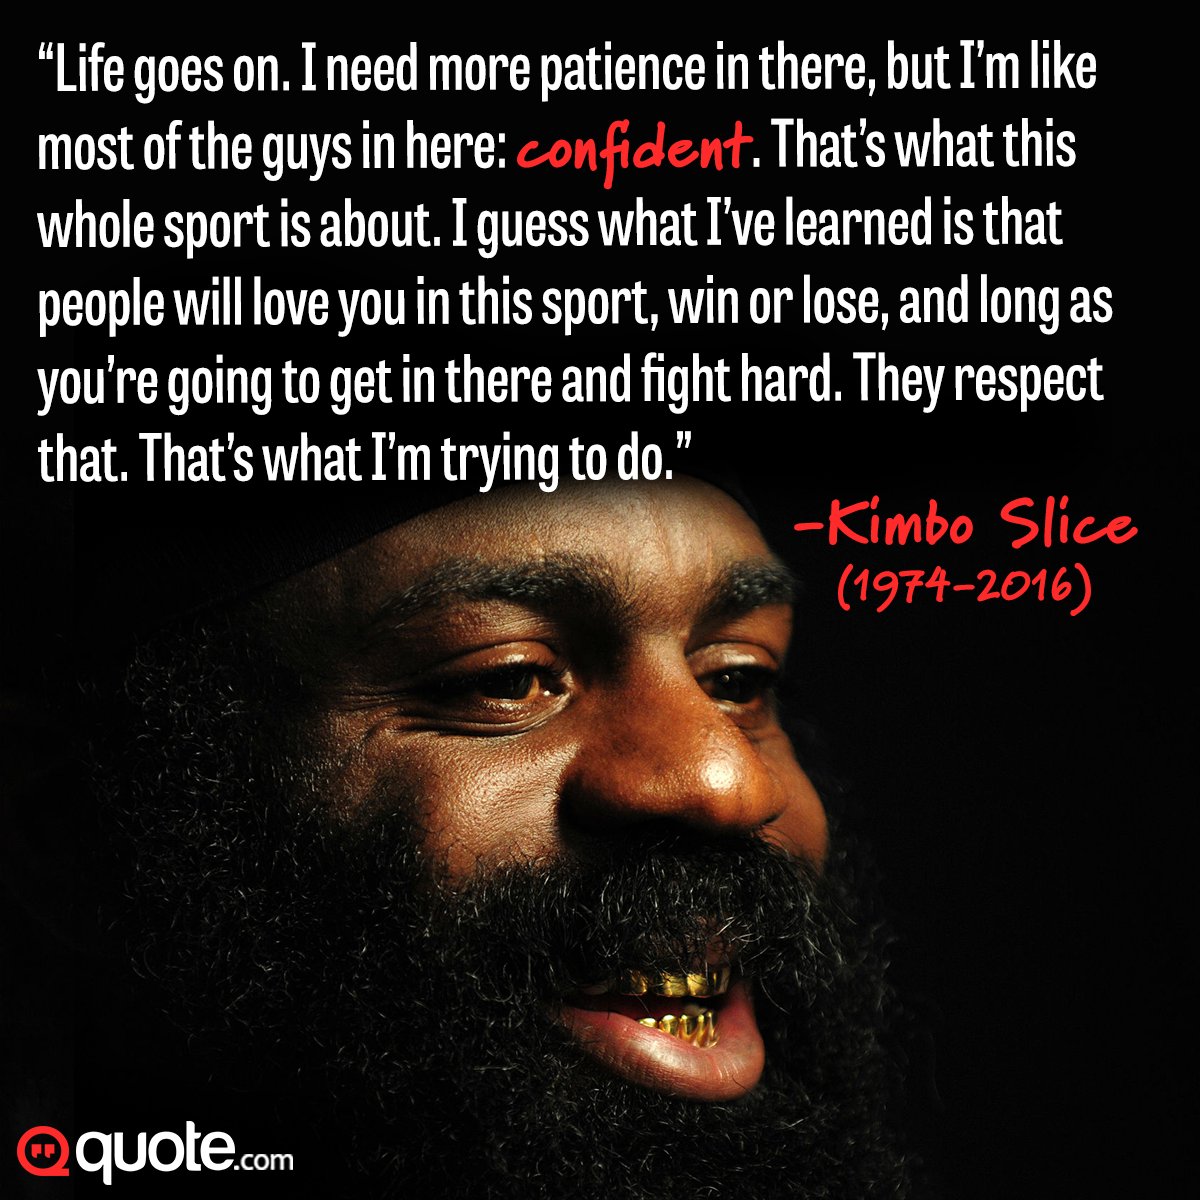 Quote On Twitter Yesterday Mma Fighter Kimbo Slice Passed Away He Was Only 42 Years Old Kimboslice Mma